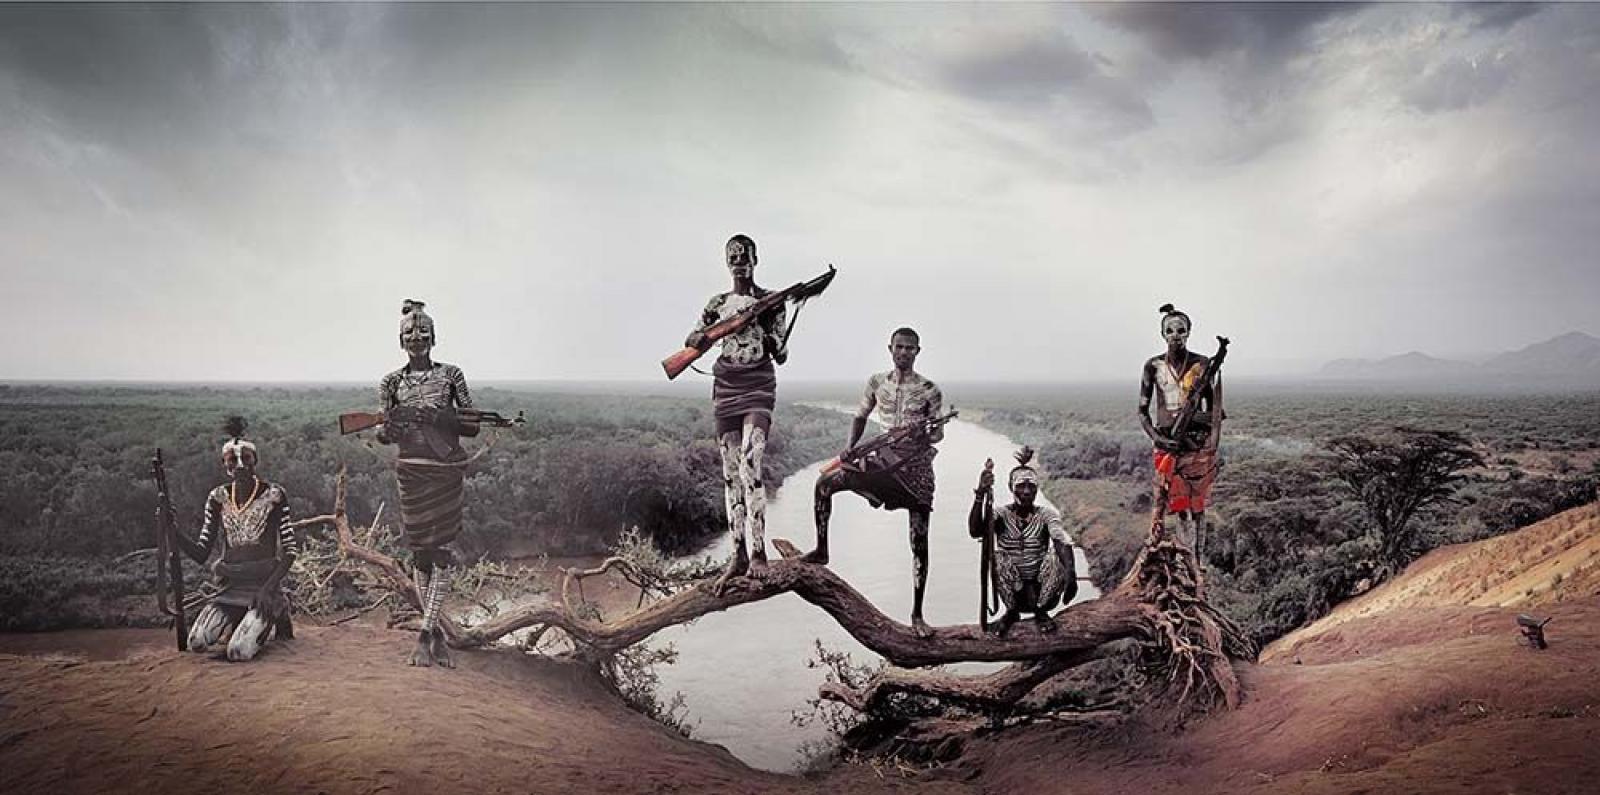 "XIV 376 - The Omo Valley, Akree, bona, Magid, Locharia, Garo, Gobo, Karo Tribe - Korcho Village, Omo Valley - Ethiopia, 2011


The Omo Valley, situated in Africa’s Great Rift Valley, is home to an estimated 200,000 indigenous peoples who have lived